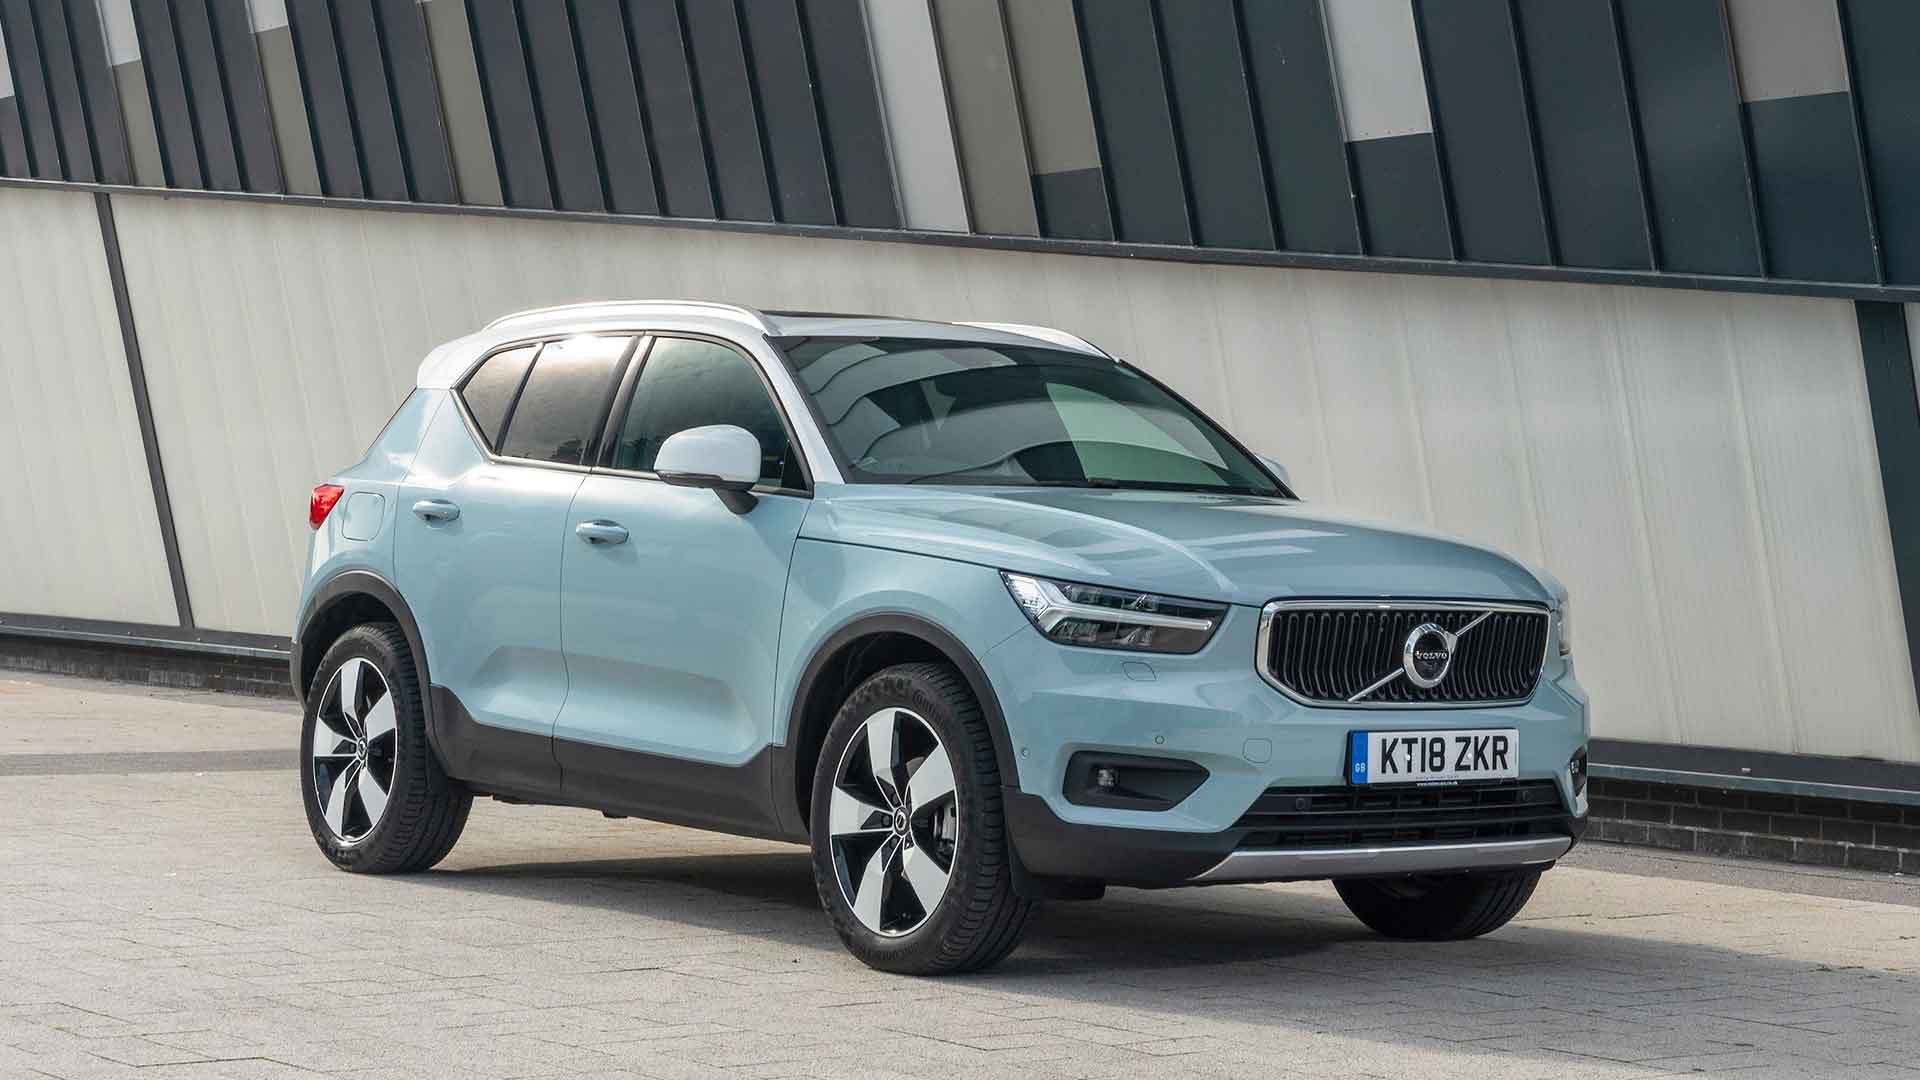 Experts pick the 10 safest new cars of 2019 – Motoring Research